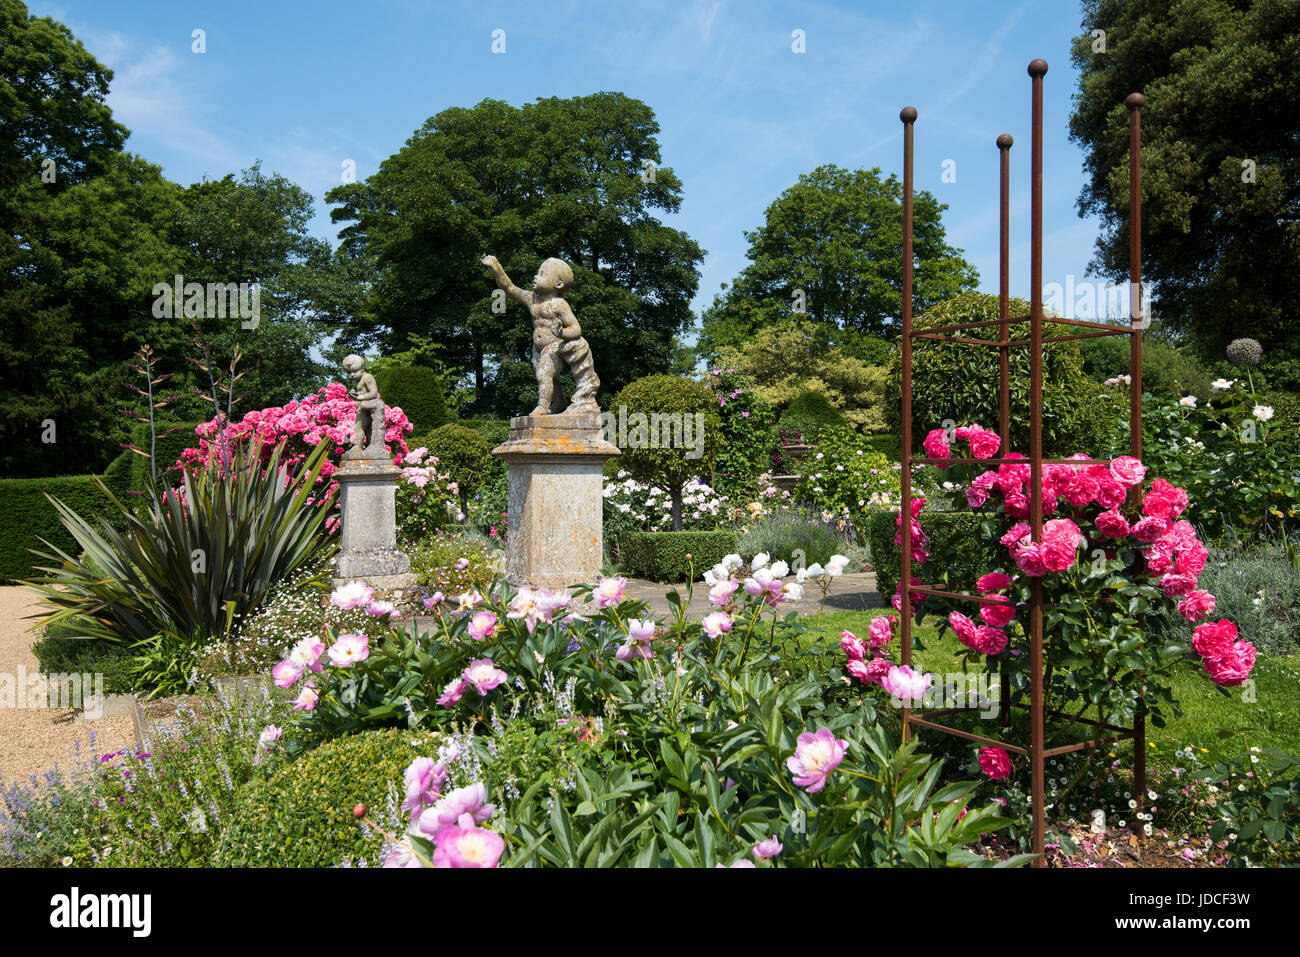 Rose Garden in full bloom at Belvoir Castle, Leicestershire England UK Stock Photo